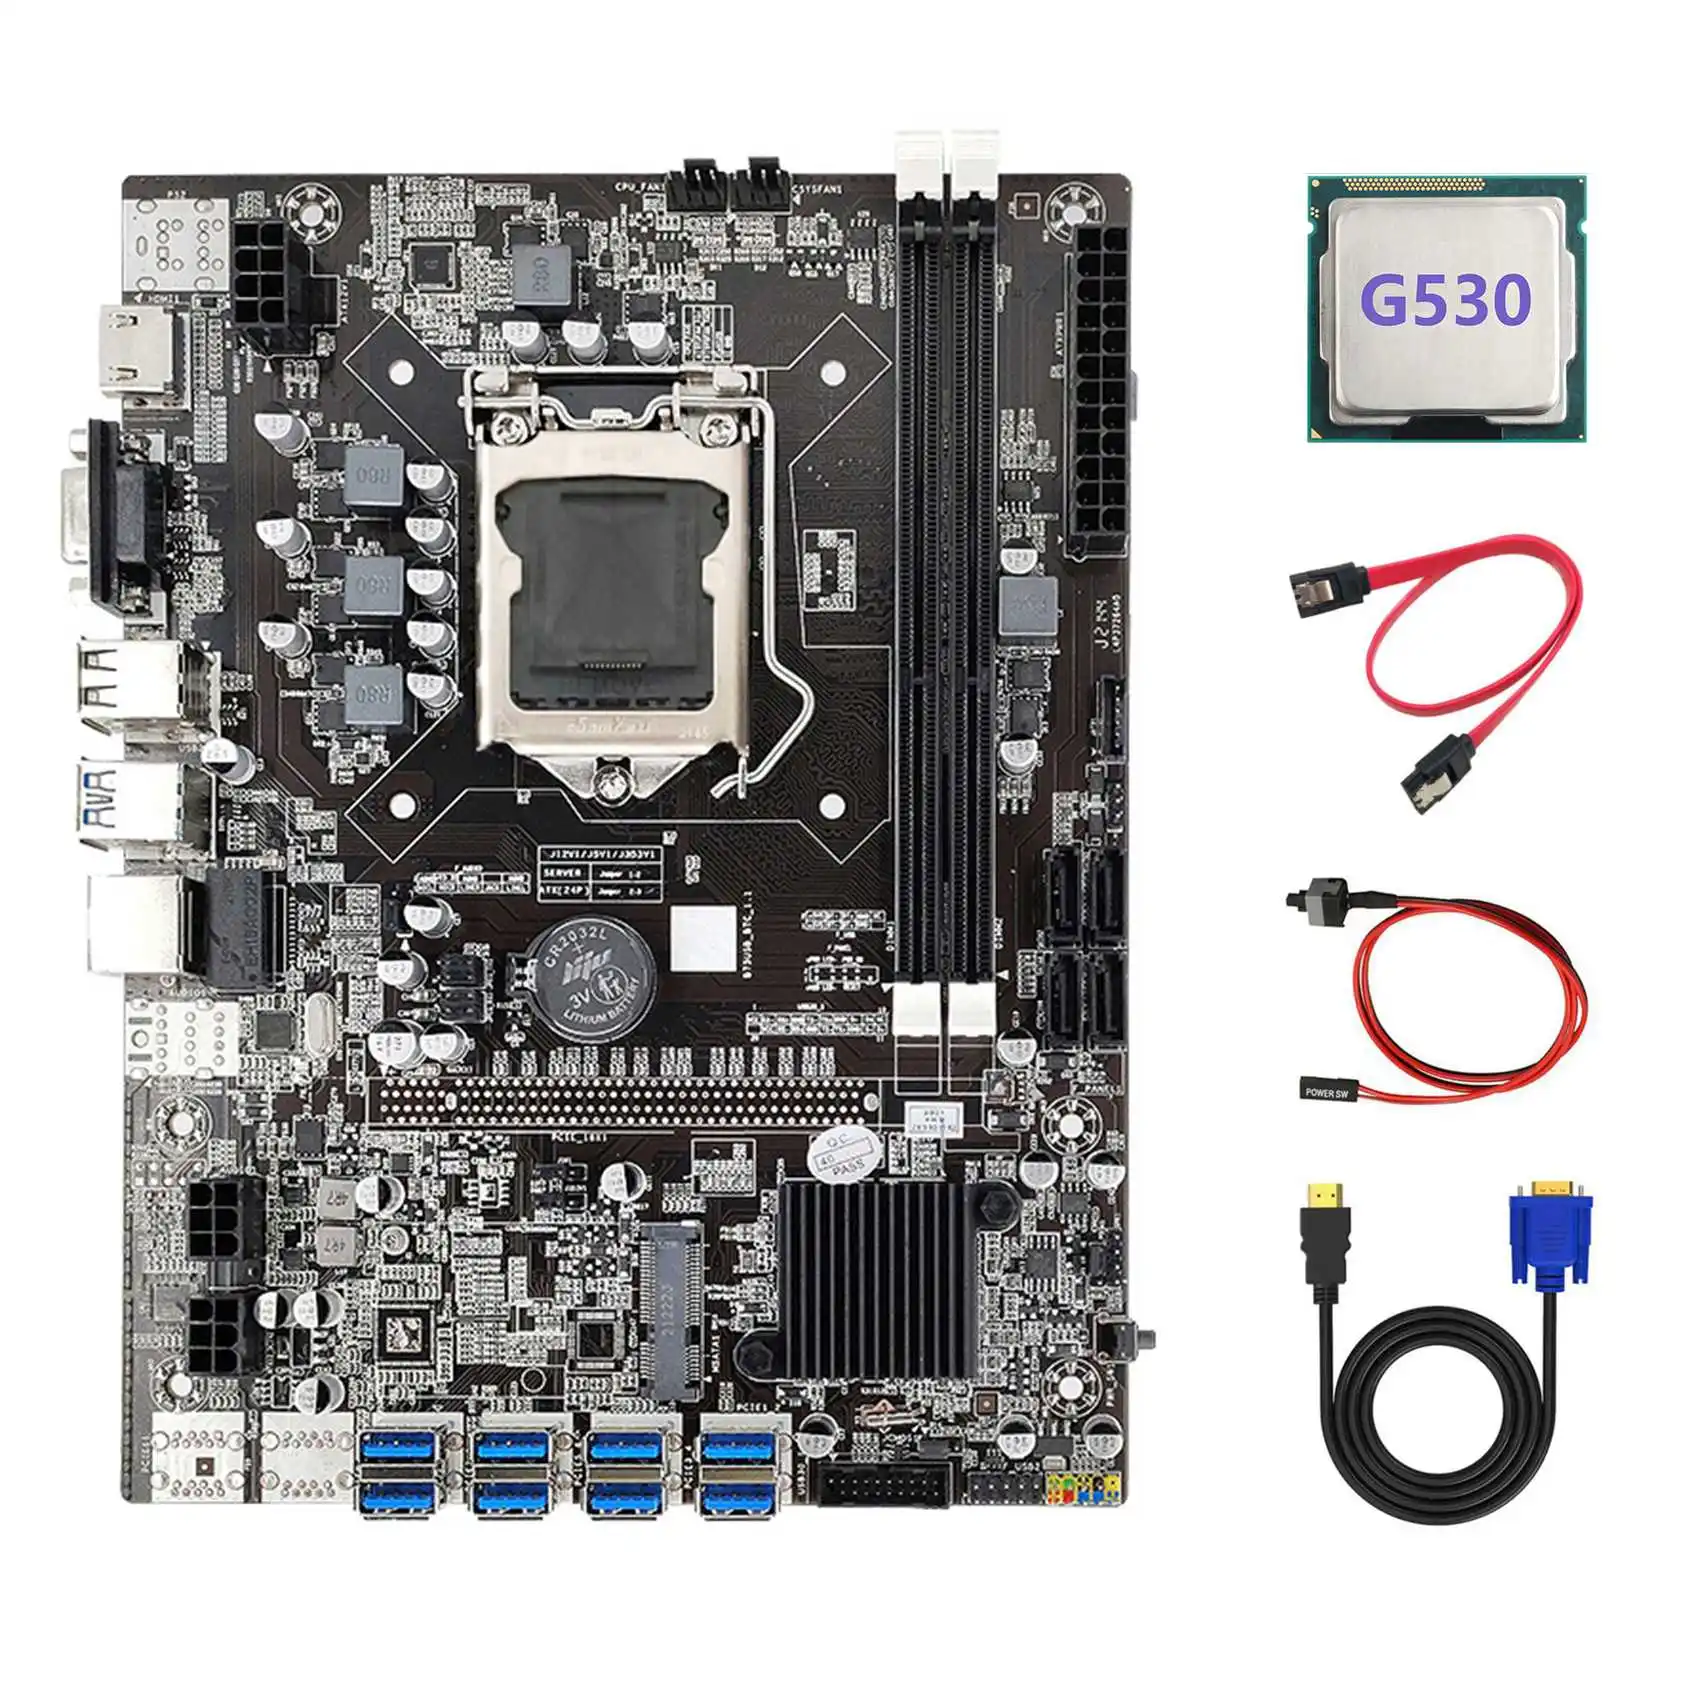 B75 ETH Mining Motherboard 8XPCIE to USB+G530 CPU+HD to VGA Cable+SATA Cable+Switch Cable LGA1155 B75 USB Motherboard